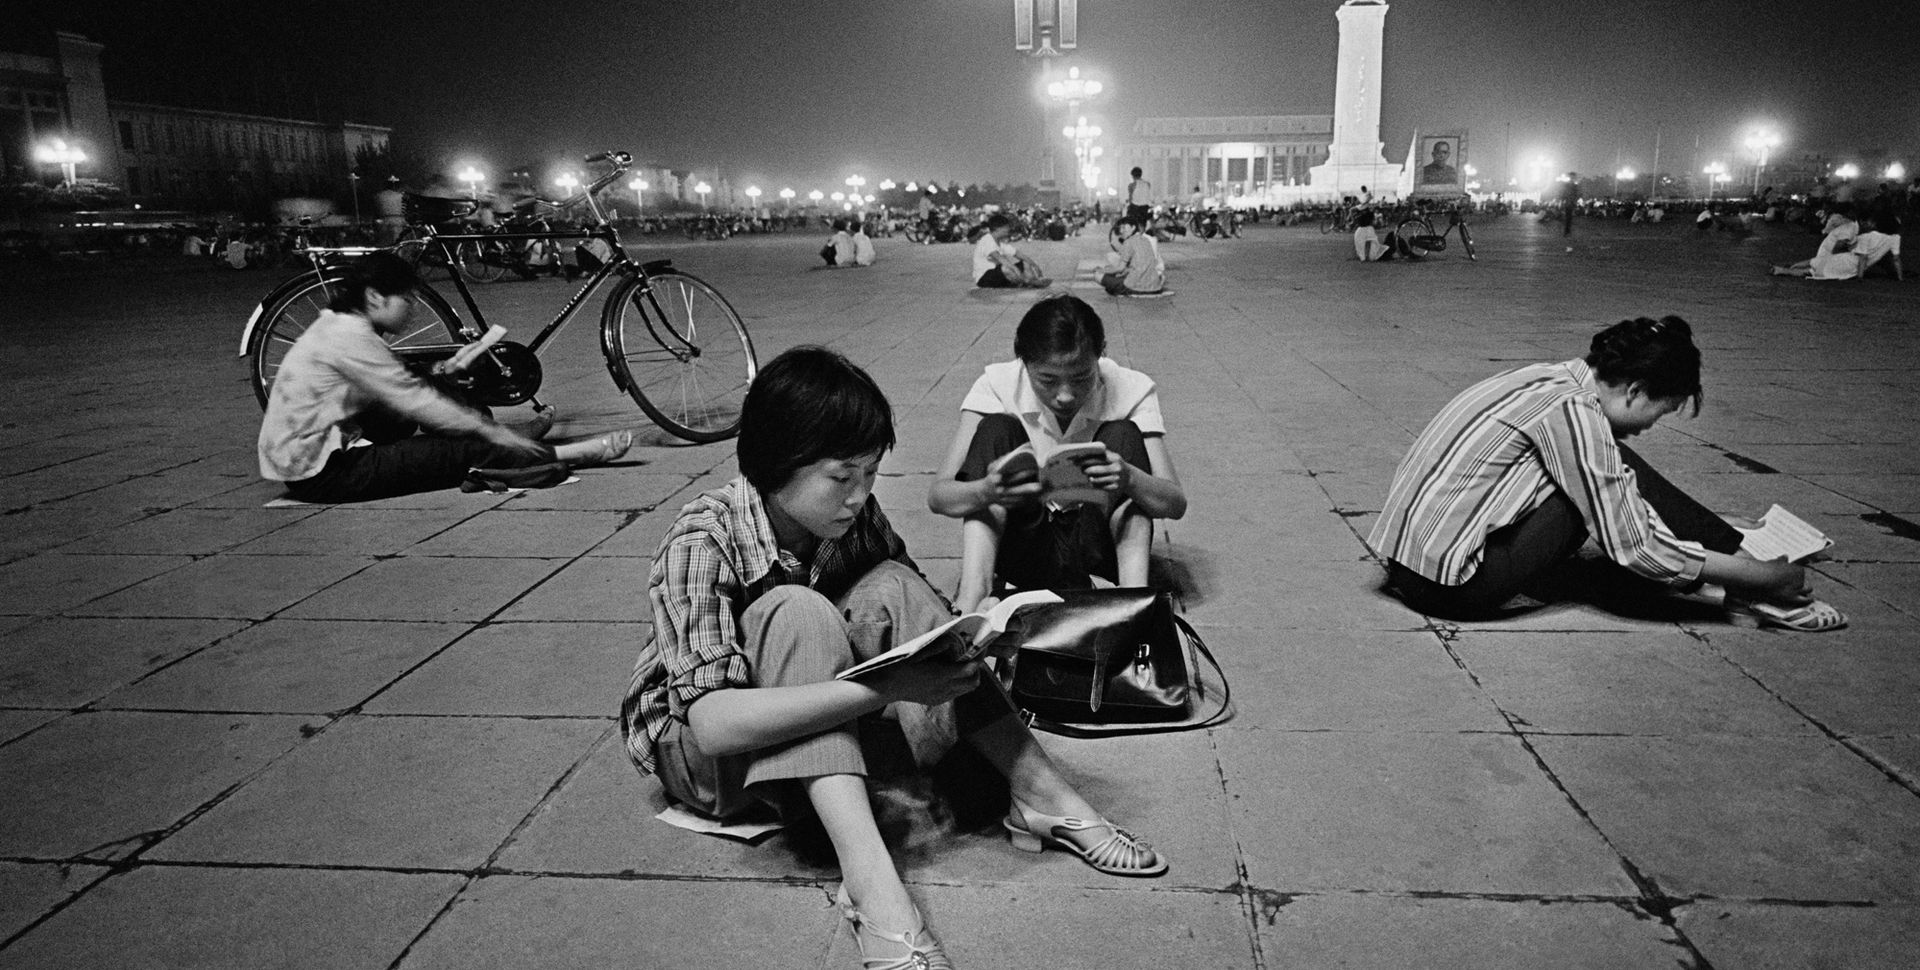 Using a long exposure, Liu captured students studying for university entrance exams under the square’s bright lights © Liu Heung Shing/AP Photo